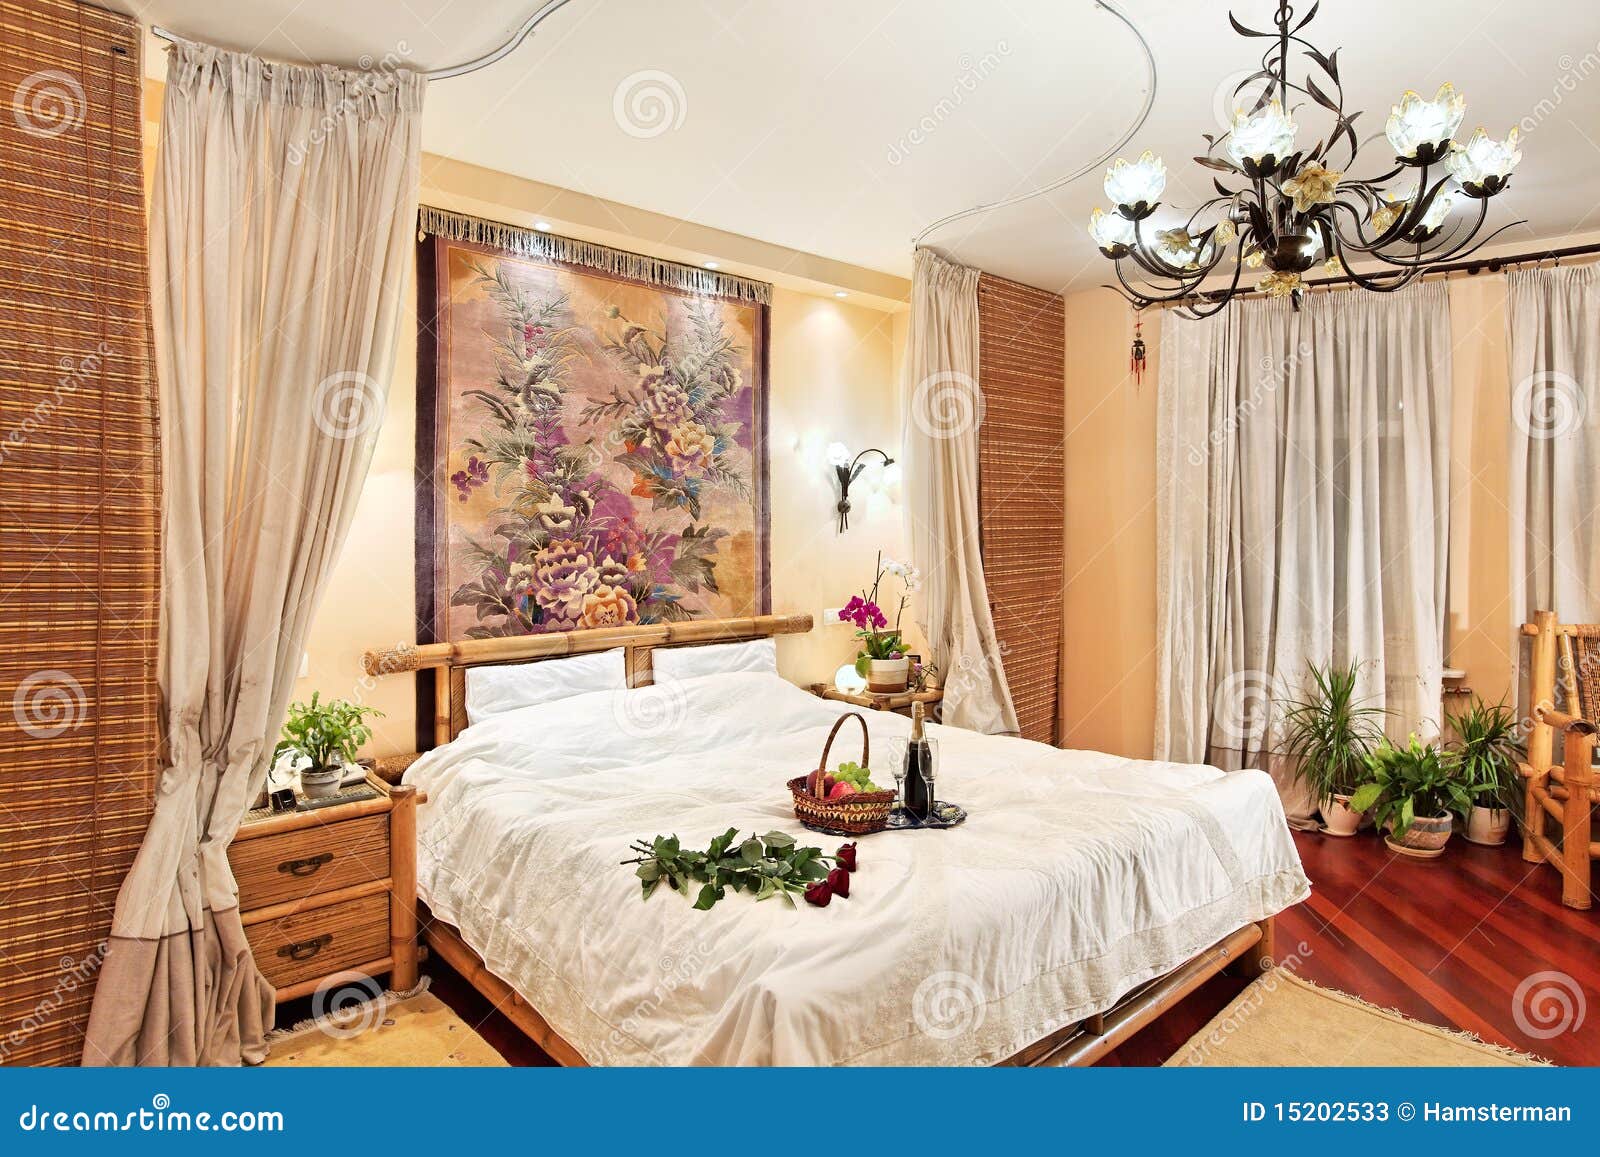 Medieval Style Bedroom With Canopy Bed Stock Image Image